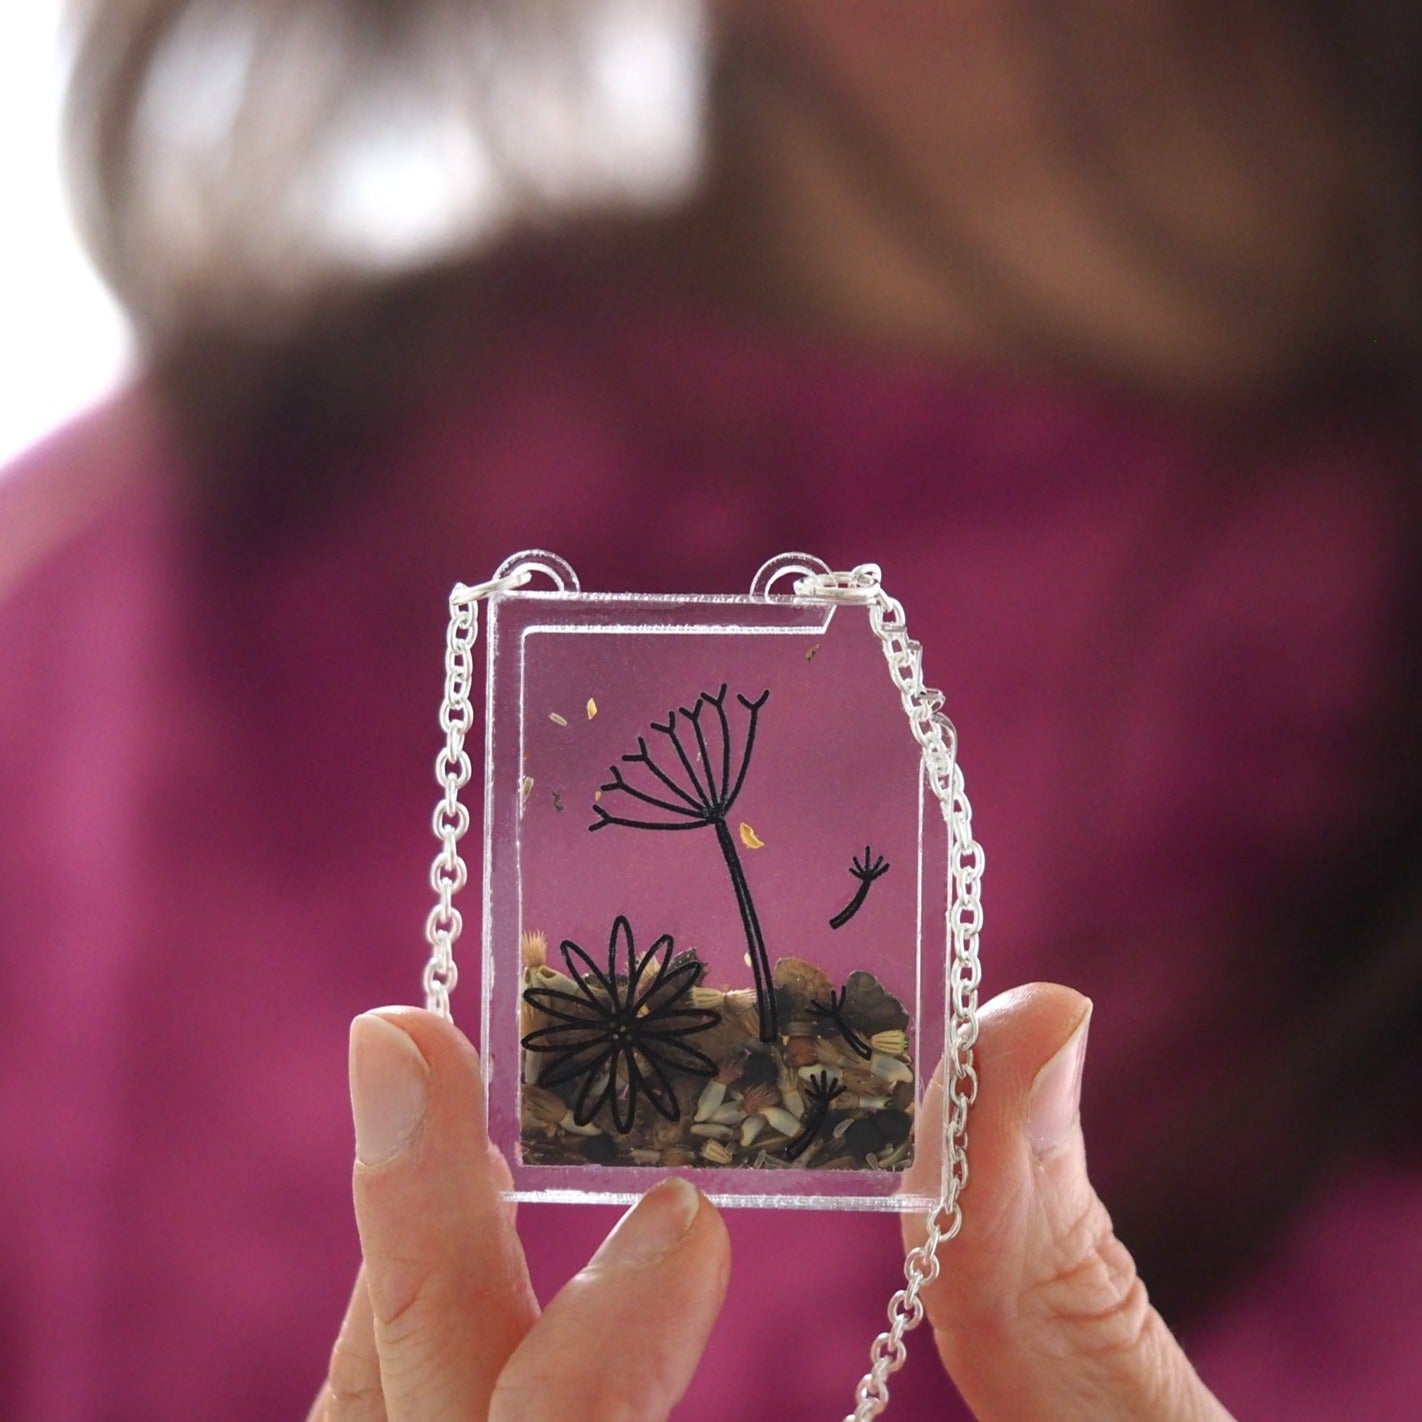 Wildflower Seed Necklace